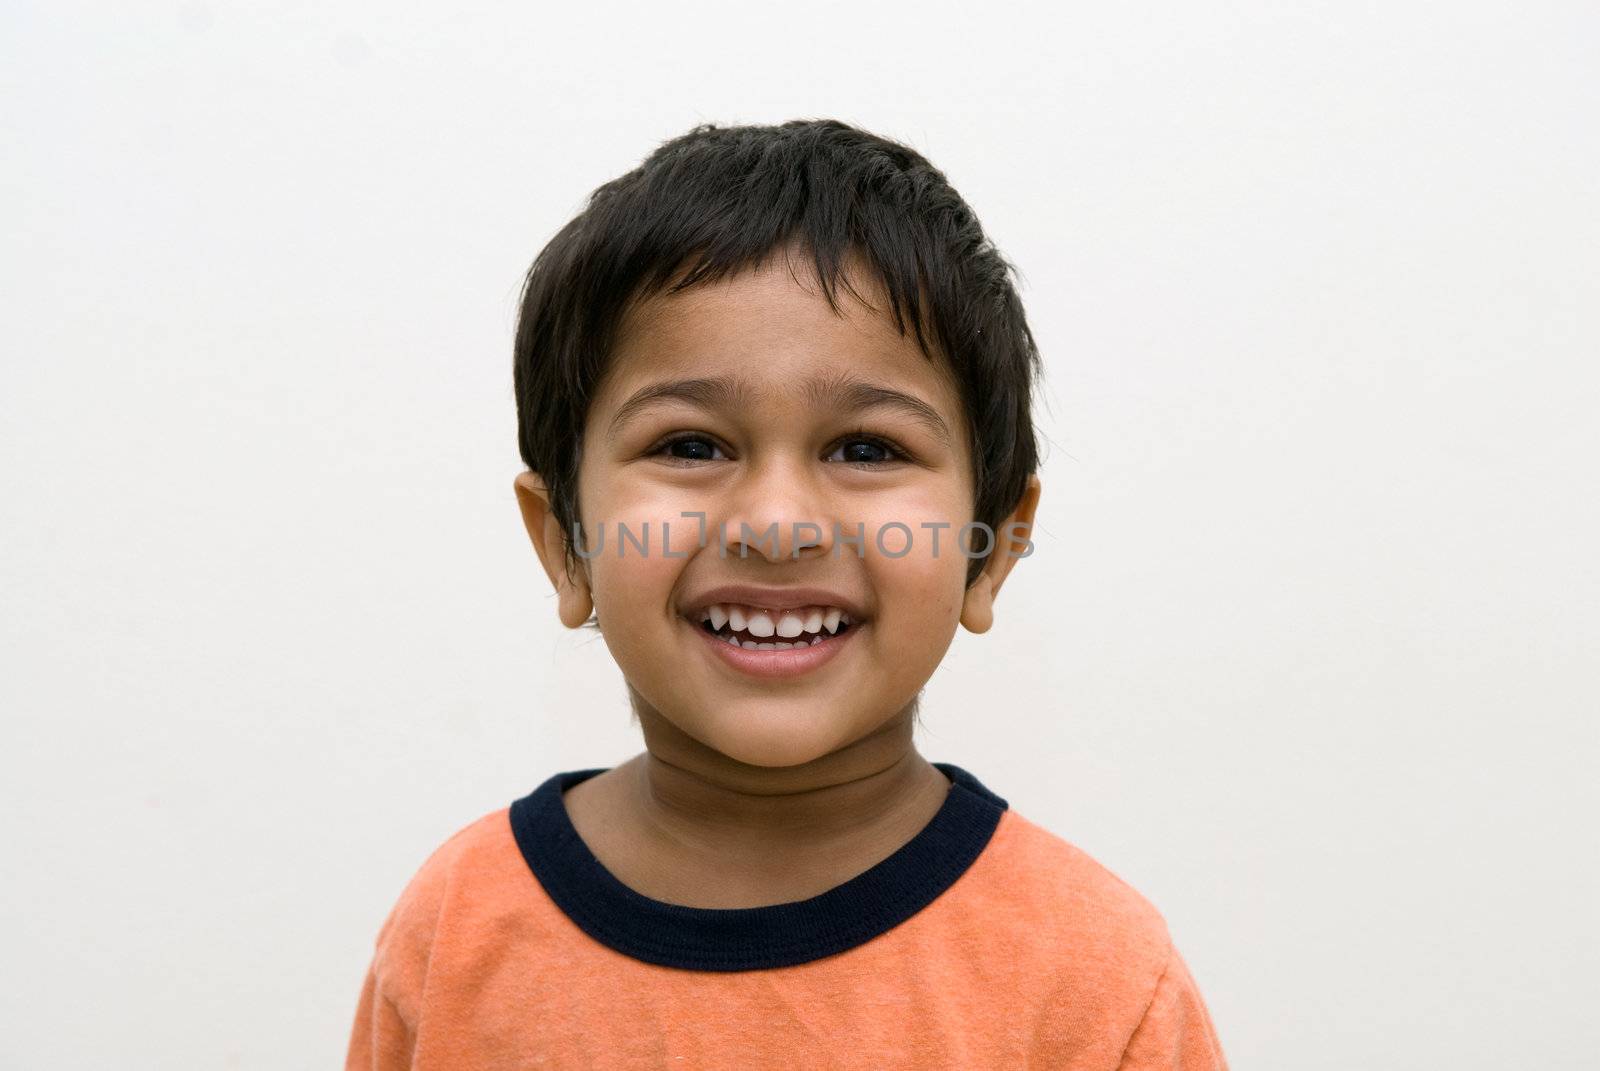 An handsome Indian kid smiling at the camera